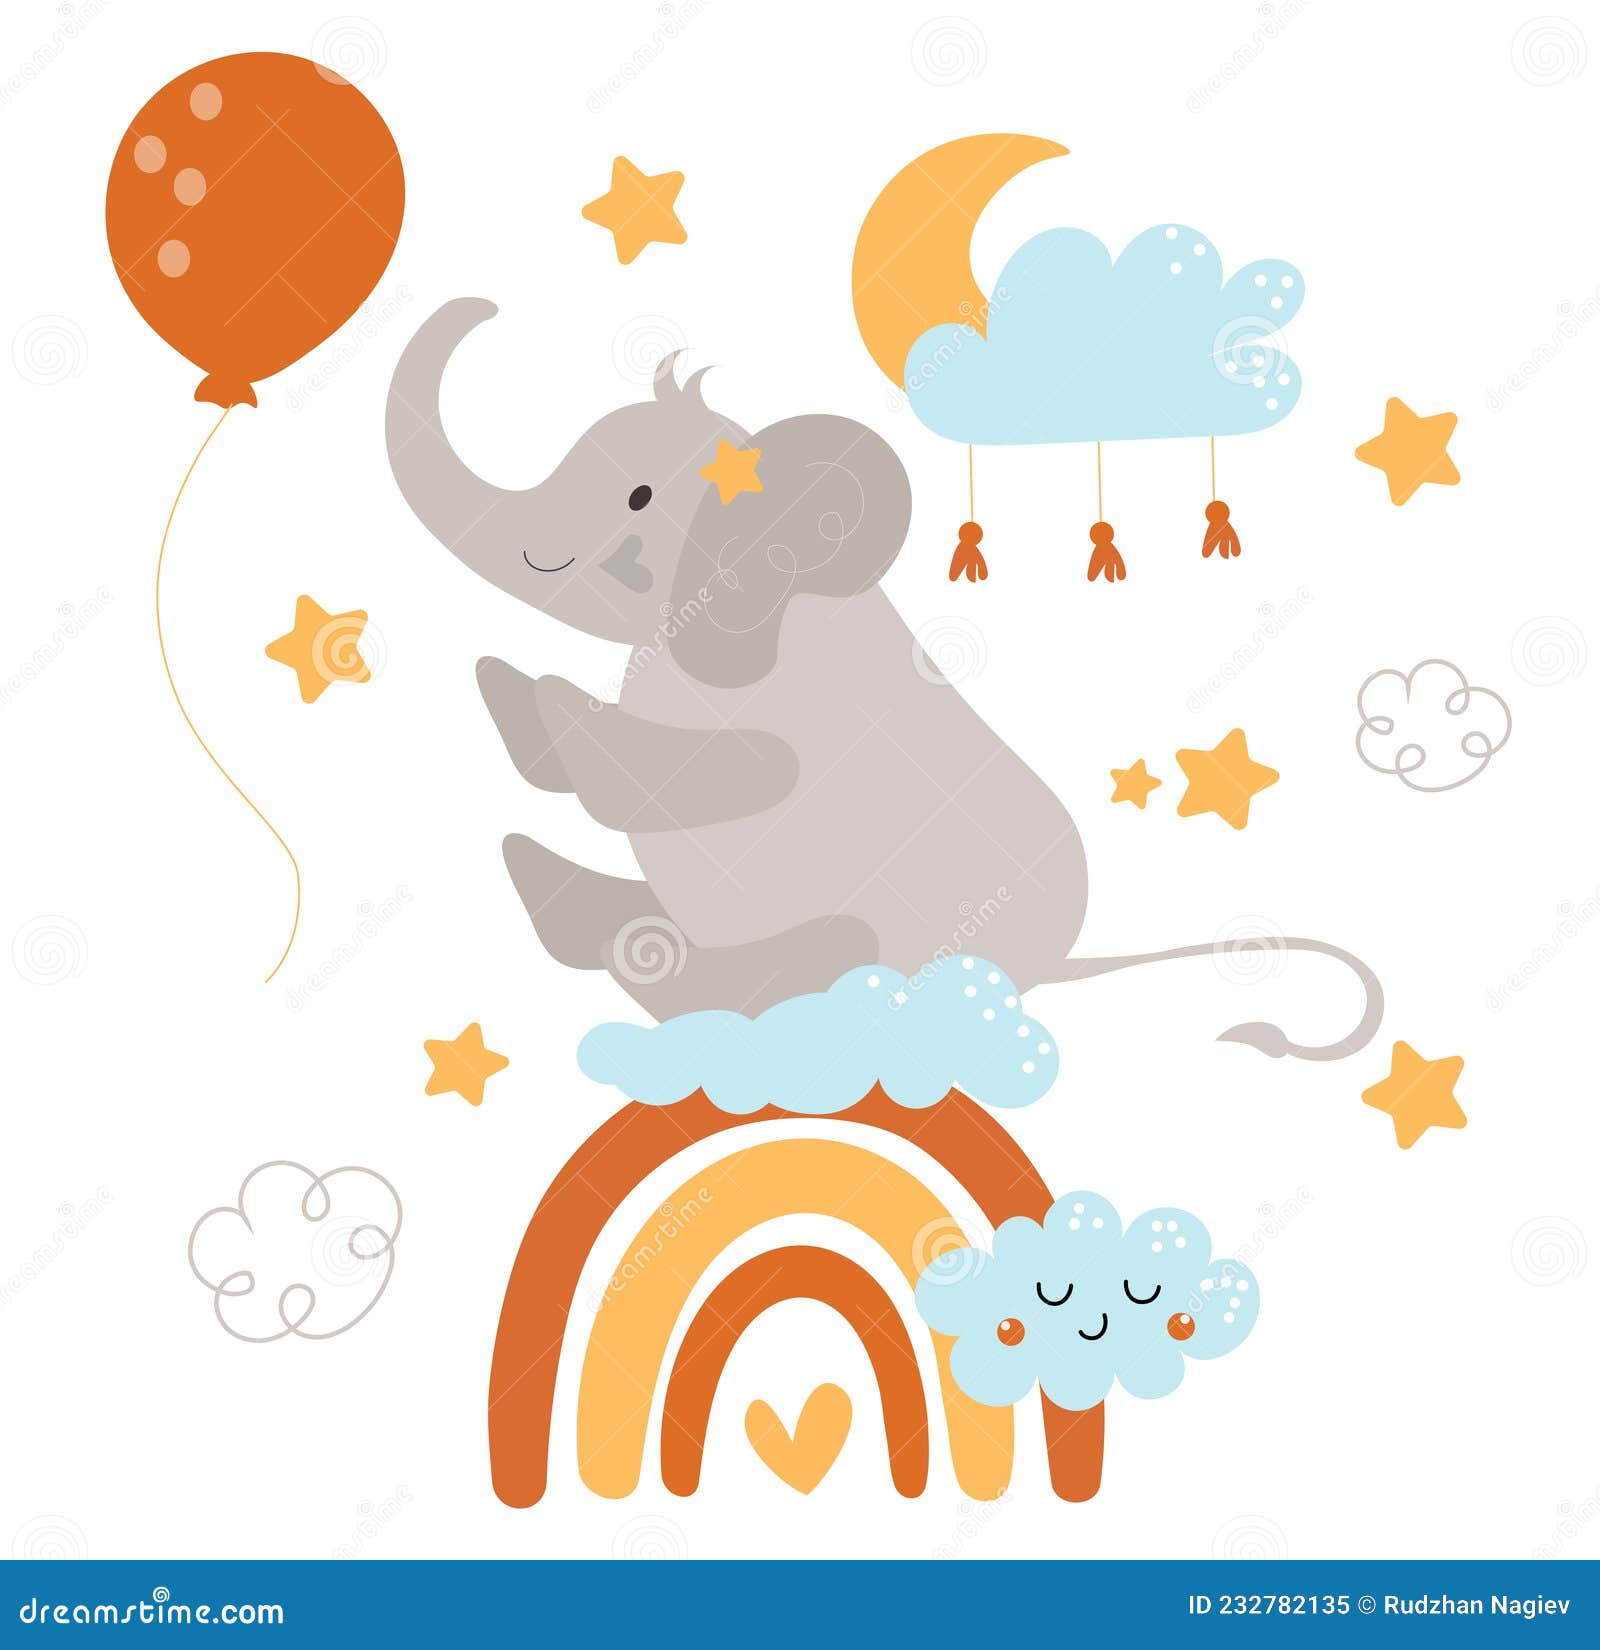 Cute baby elephant concept stock vector. Illustration of animal - 232782135